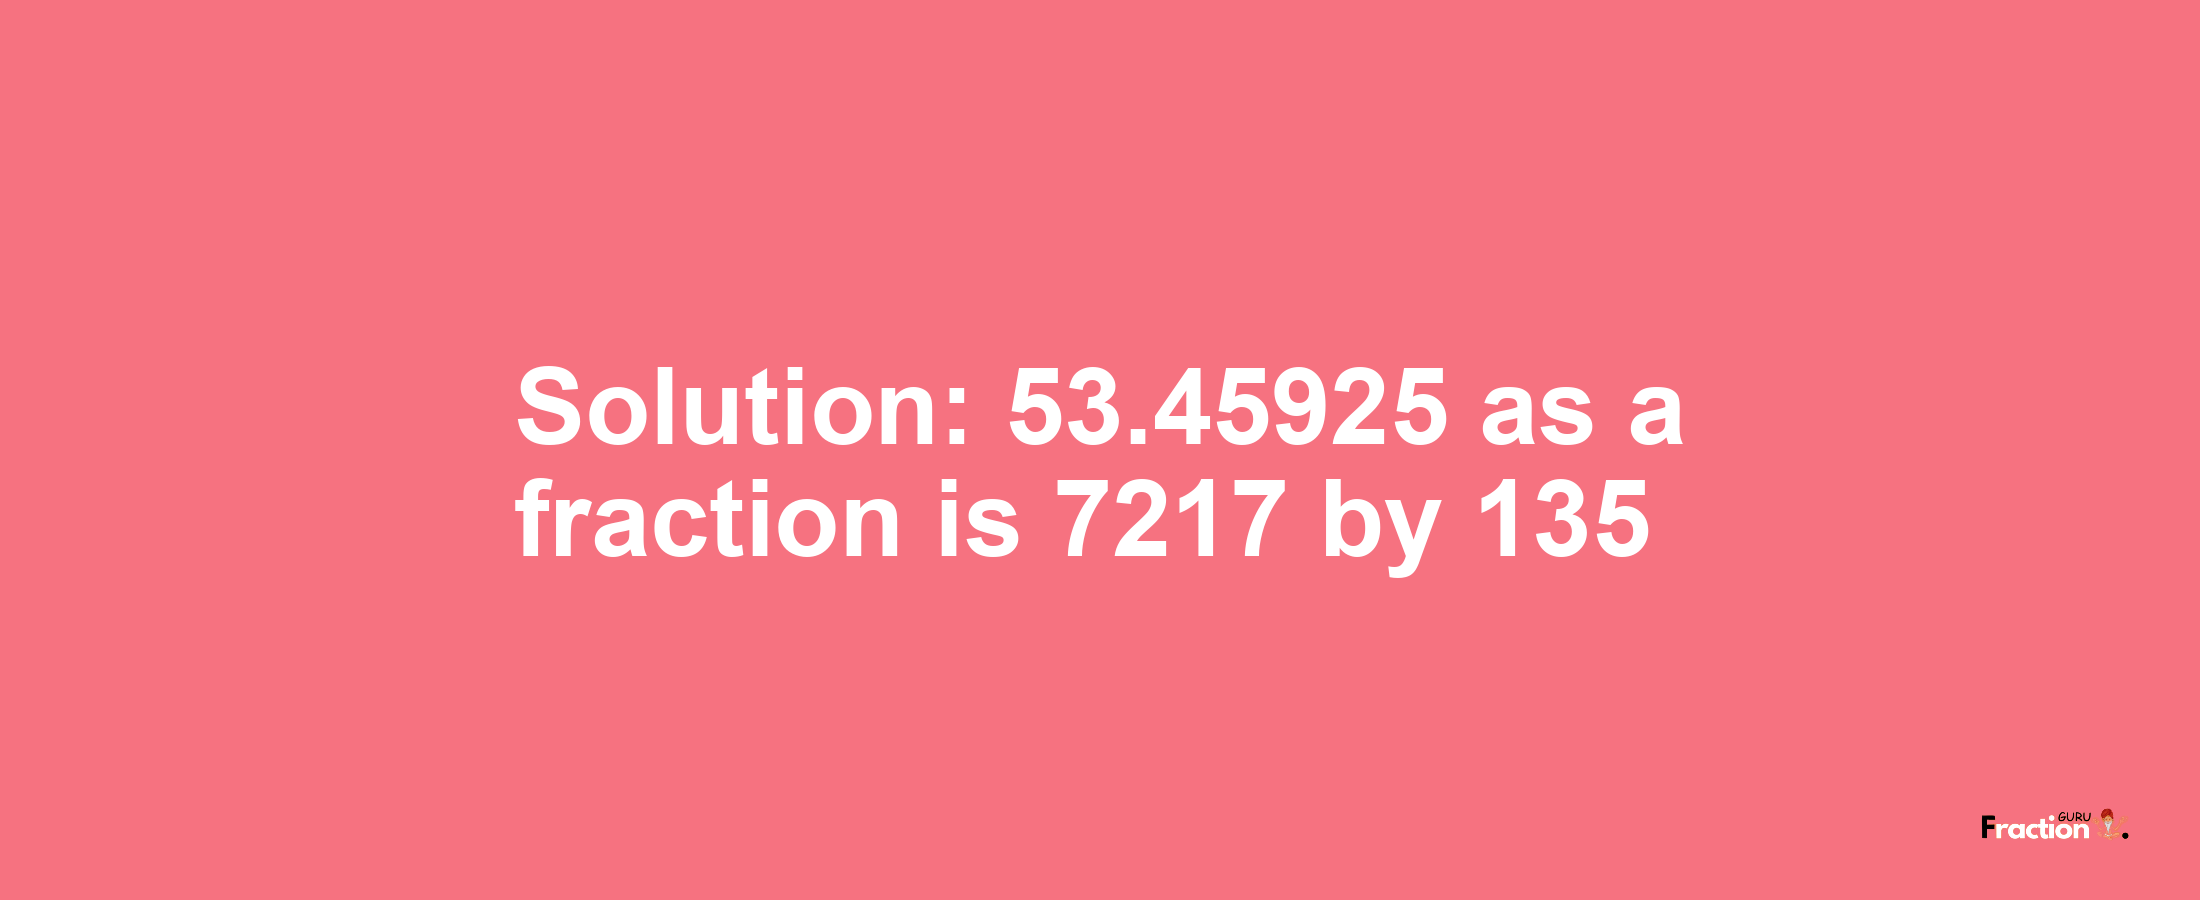 Solution:53.45925 as a fraction is 7217/135